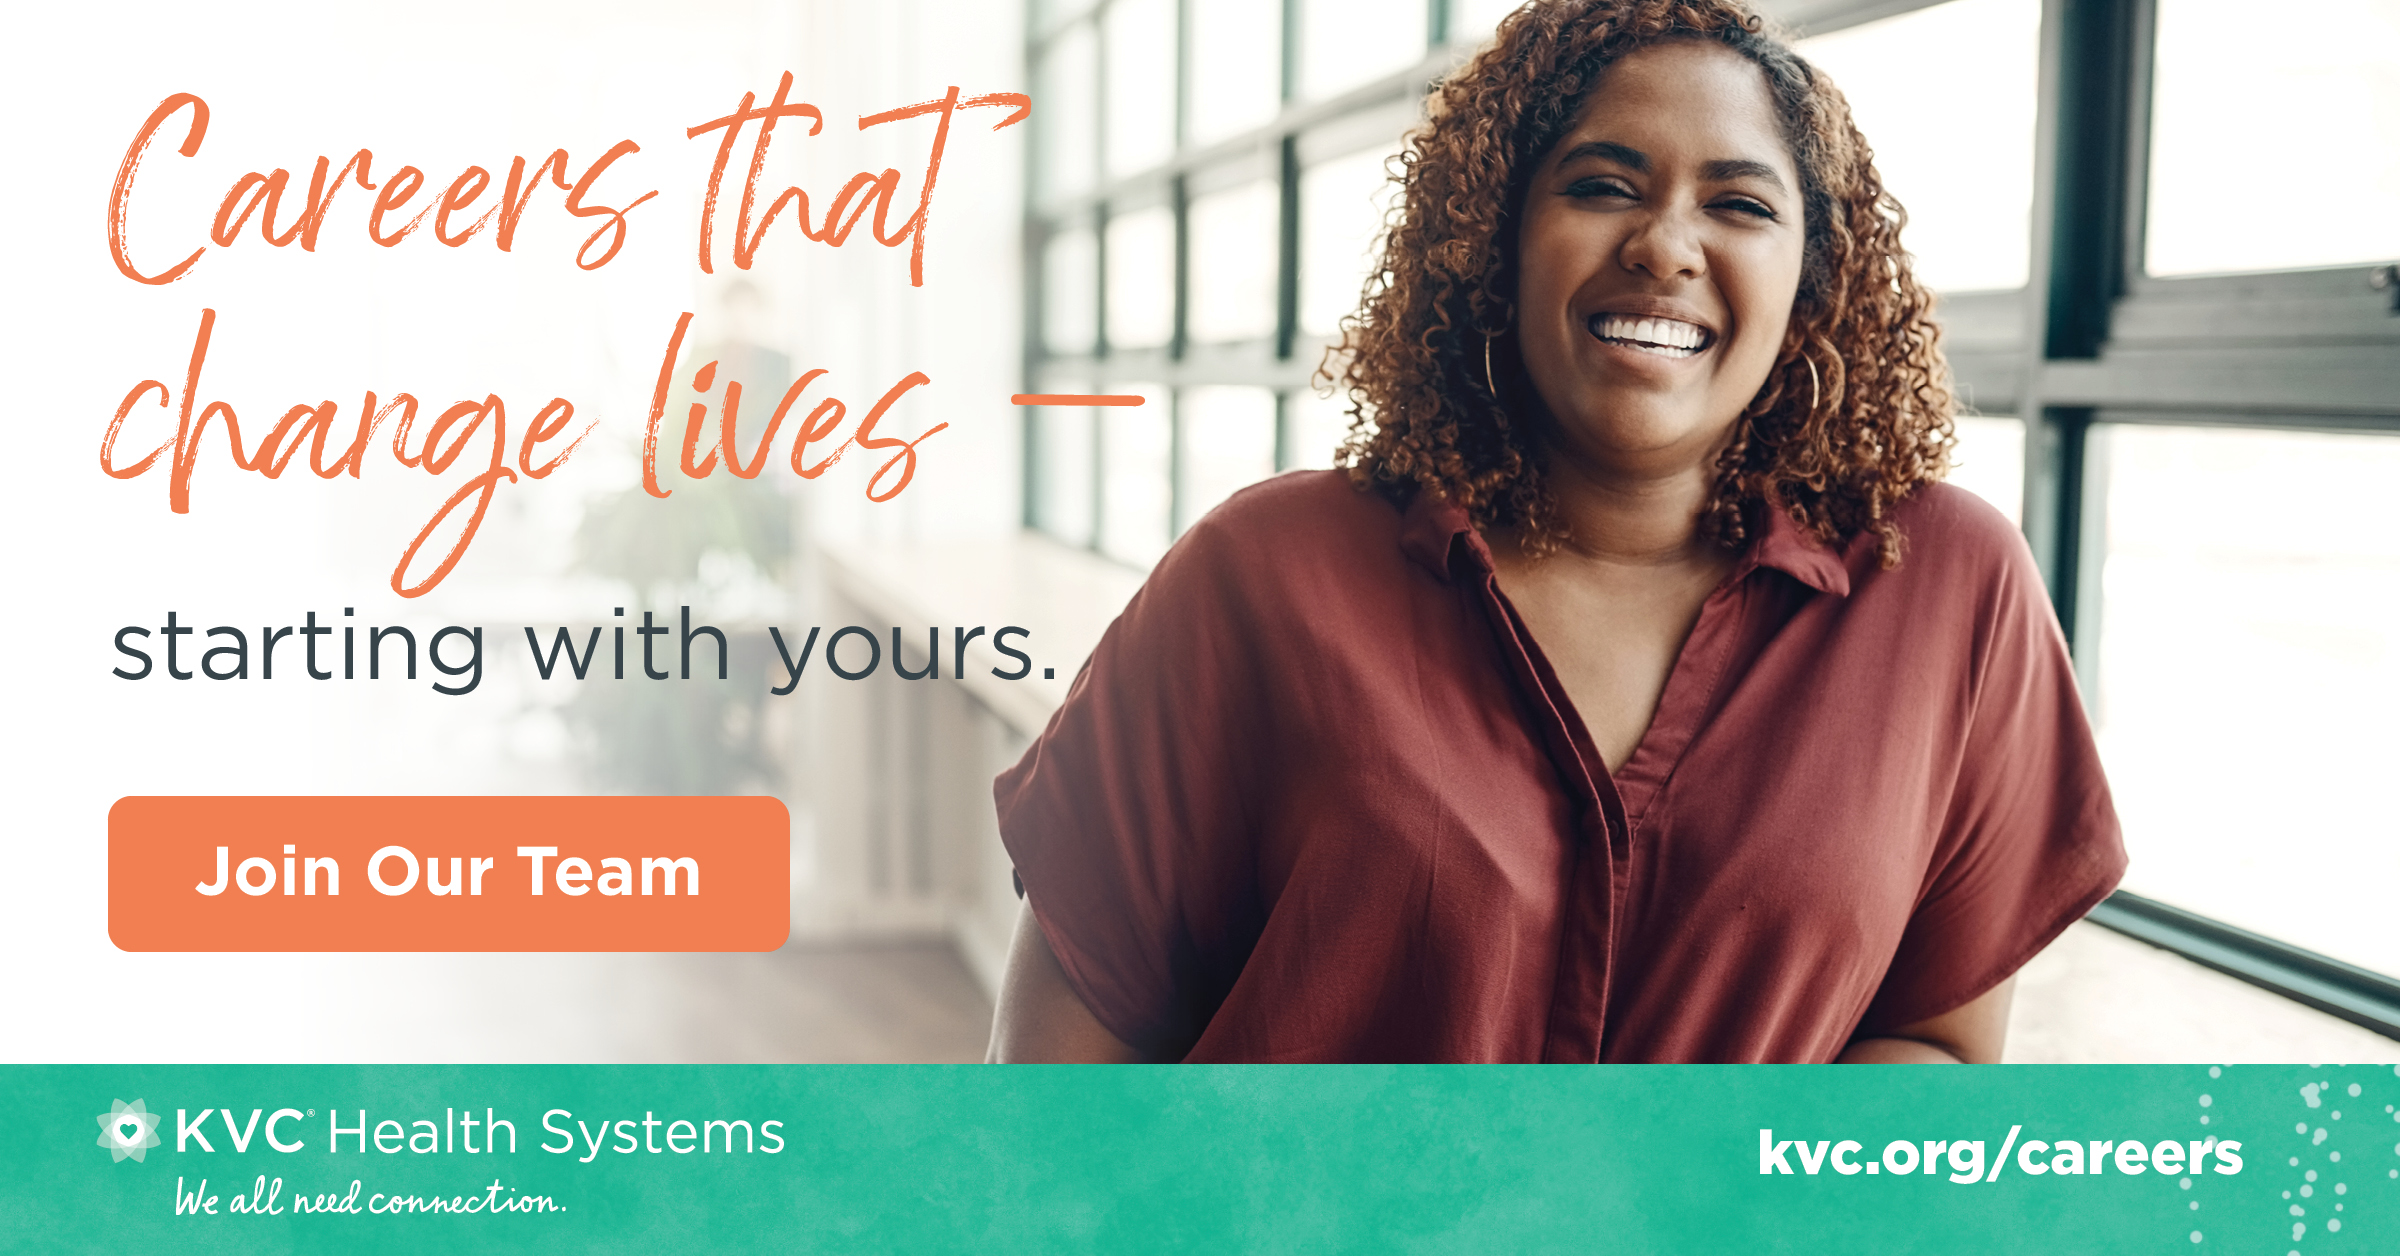 Careers that change lives - starting with yours. We're hiring.